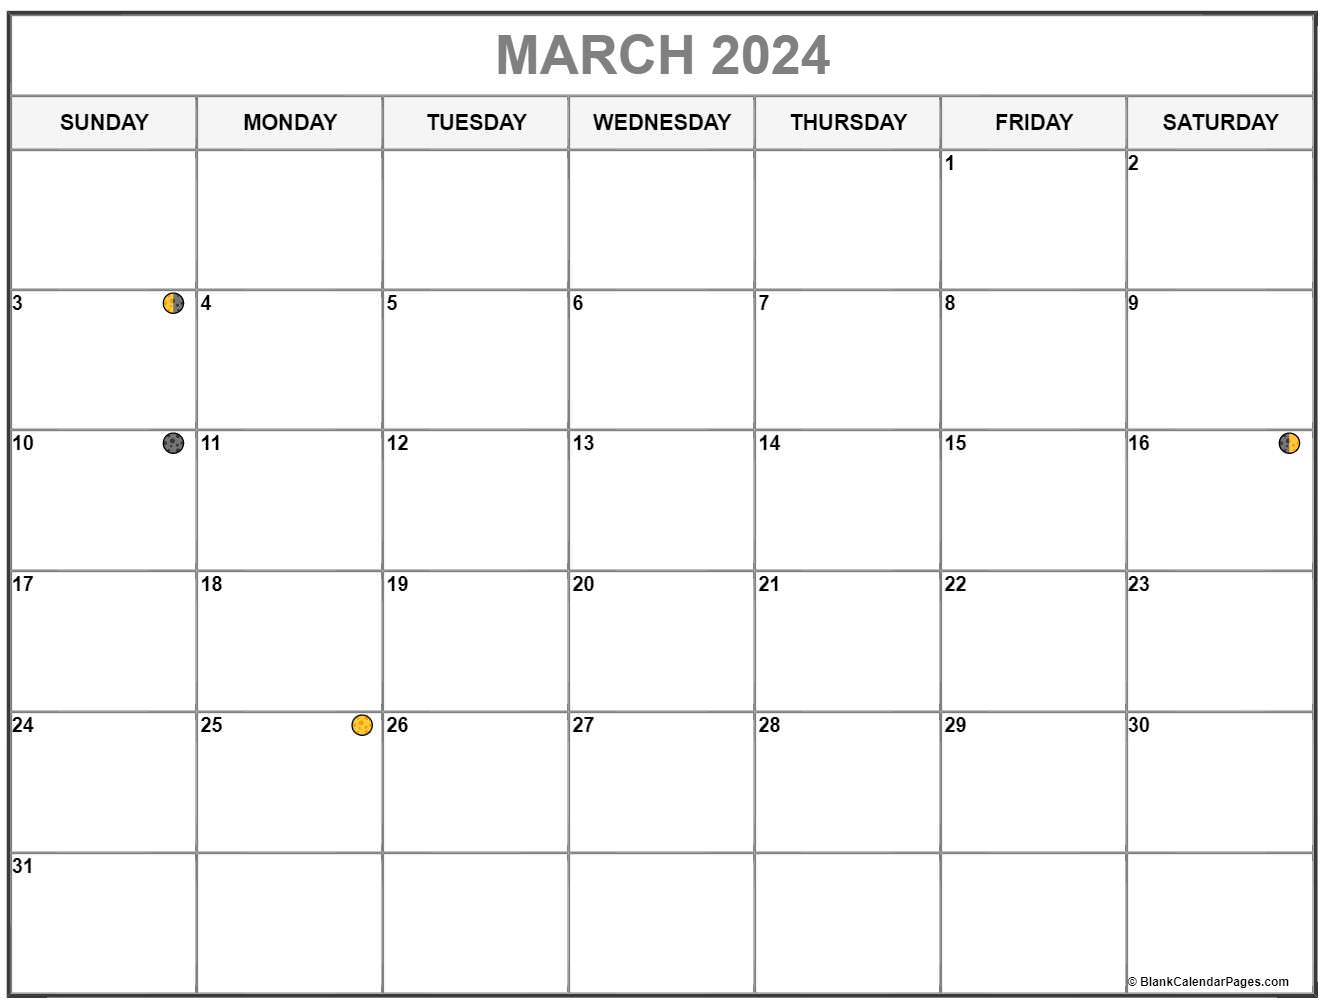 march-2023-moon-phases-2023-calendar